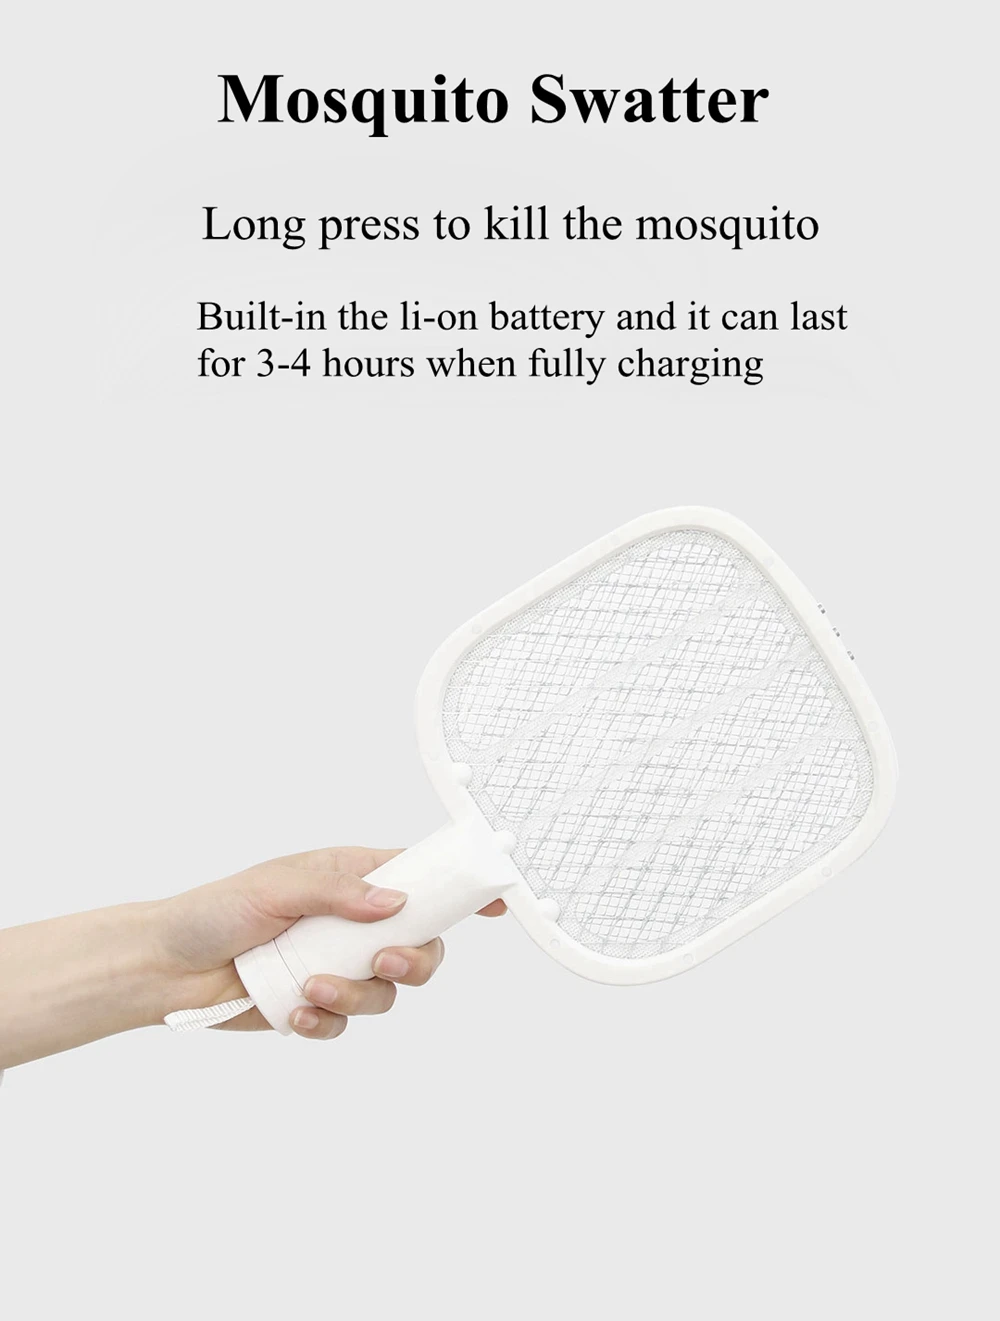 37C0A62B C6E0 43B7 Aa62 D13A86D0411B.jpg &Lt;H1&Gt;Yeelight Usb Rechargeable Mosquito Swatter Led Uv Mosquito Killer Lamp&Lt;/H1&Gt; &Lt;H2&Gt;&Lt;Strong&Gt;Main Feature:&Lt;/Strong&Gt;&Lt;/H2&Gt; &Lt;Ul&Gt; &Lt;Li&Gt;Electric Mosquito Swatter: Built-In Rechargeable 18650 Battery, Short Charging Time, Long Use Time&Lt;/Li&Gt; &Lt;Li&Gt;360-400Nm Uv Trap Lamp: Comes With A Light-Controlled Sensor,  Easy To Kill Mosquitoes In Dark Environments&Lt;/Li&Gt; &Lt;Li&Gt;Safe To Use: Physical Mosquito Killing, No Chemicals, No Radiation, And Entirely Non-Toxic. Health And Environmental Protection&Lt;/Li&Gt; &Lt;Li&Gt;Portable To Carry: This Mosquito Zapper Comes In A Practical Design, With The Small Dimensions Allowing You To Carry It Anywhere You Need It!&Lt;/Li&Gt; &Lt;/Ul&Gt; Yeelight Usb Rechargeable Mosquito Yeelight Usb Rechargeable Mosquito Swatter Led Uv Mosquito Killer Lamp